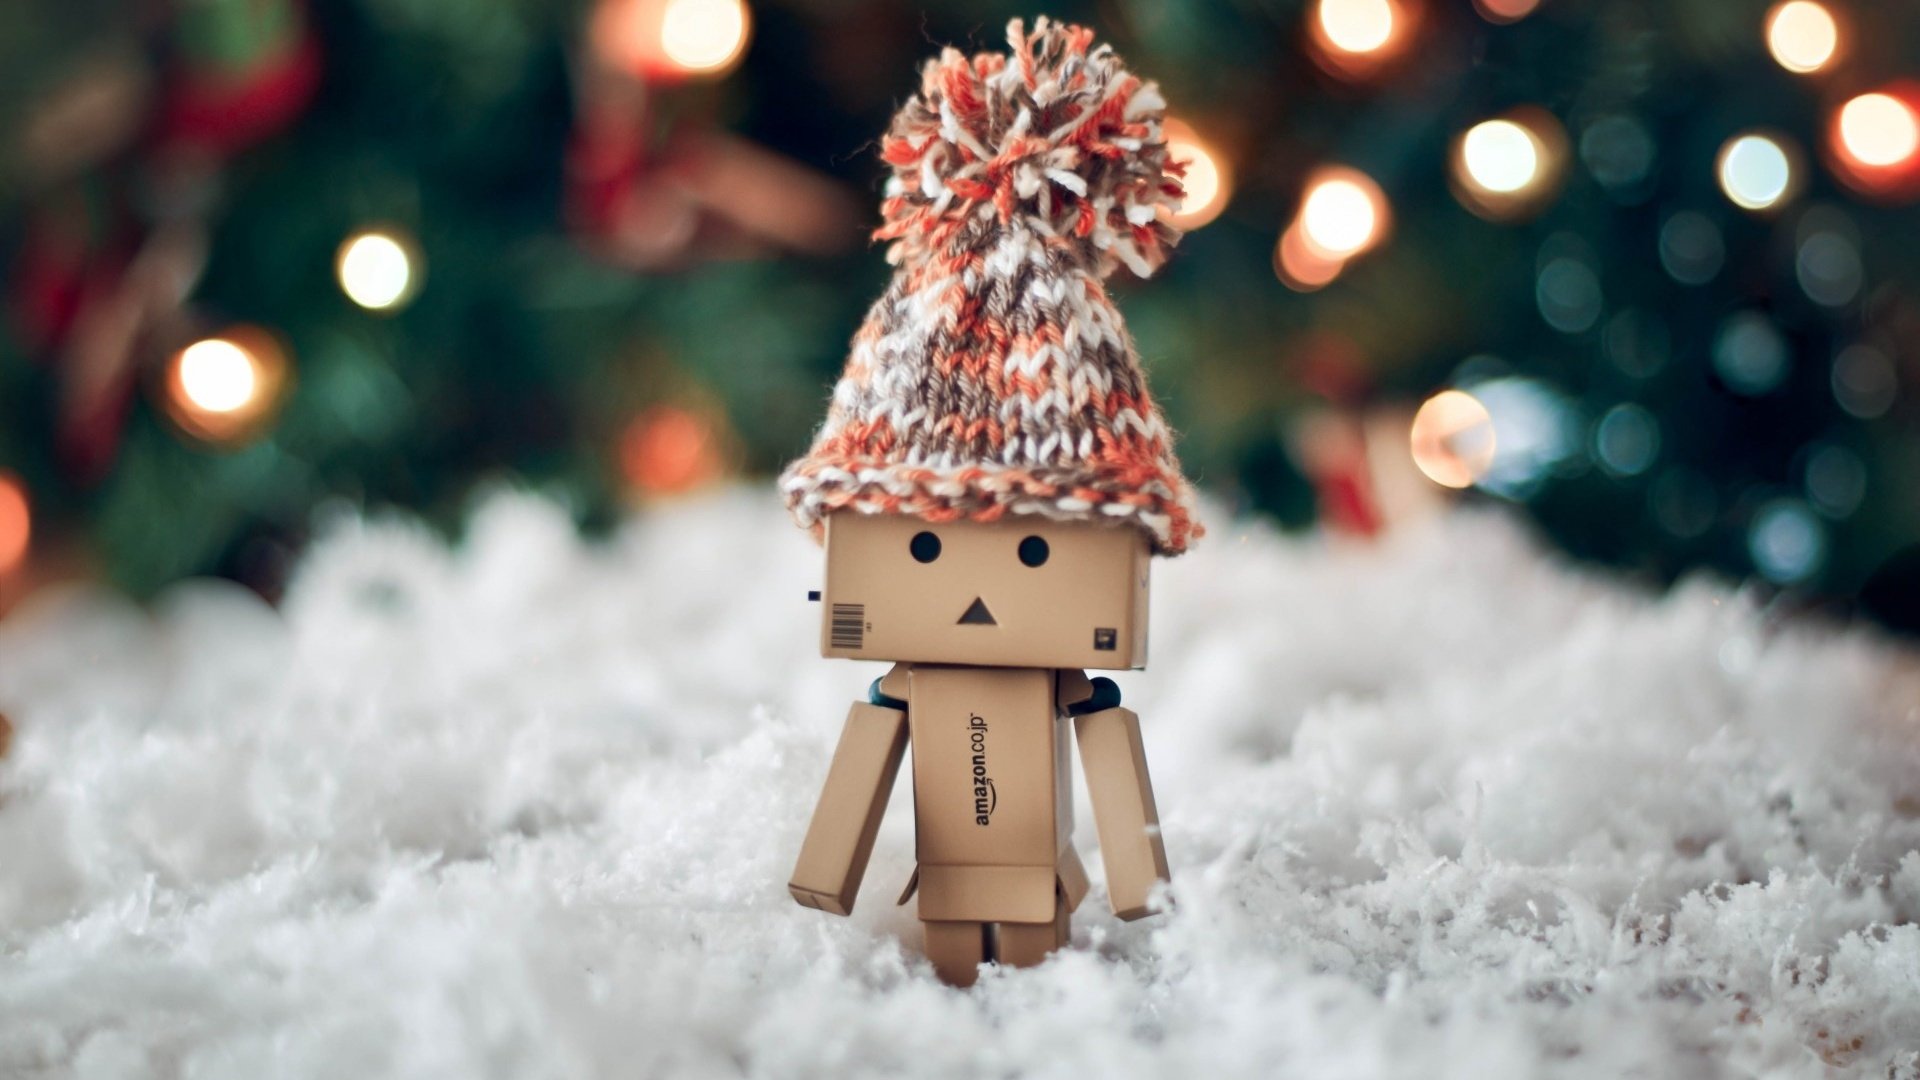 Download full hd 1080p Danbo computer wallpaper ID:30387 for free